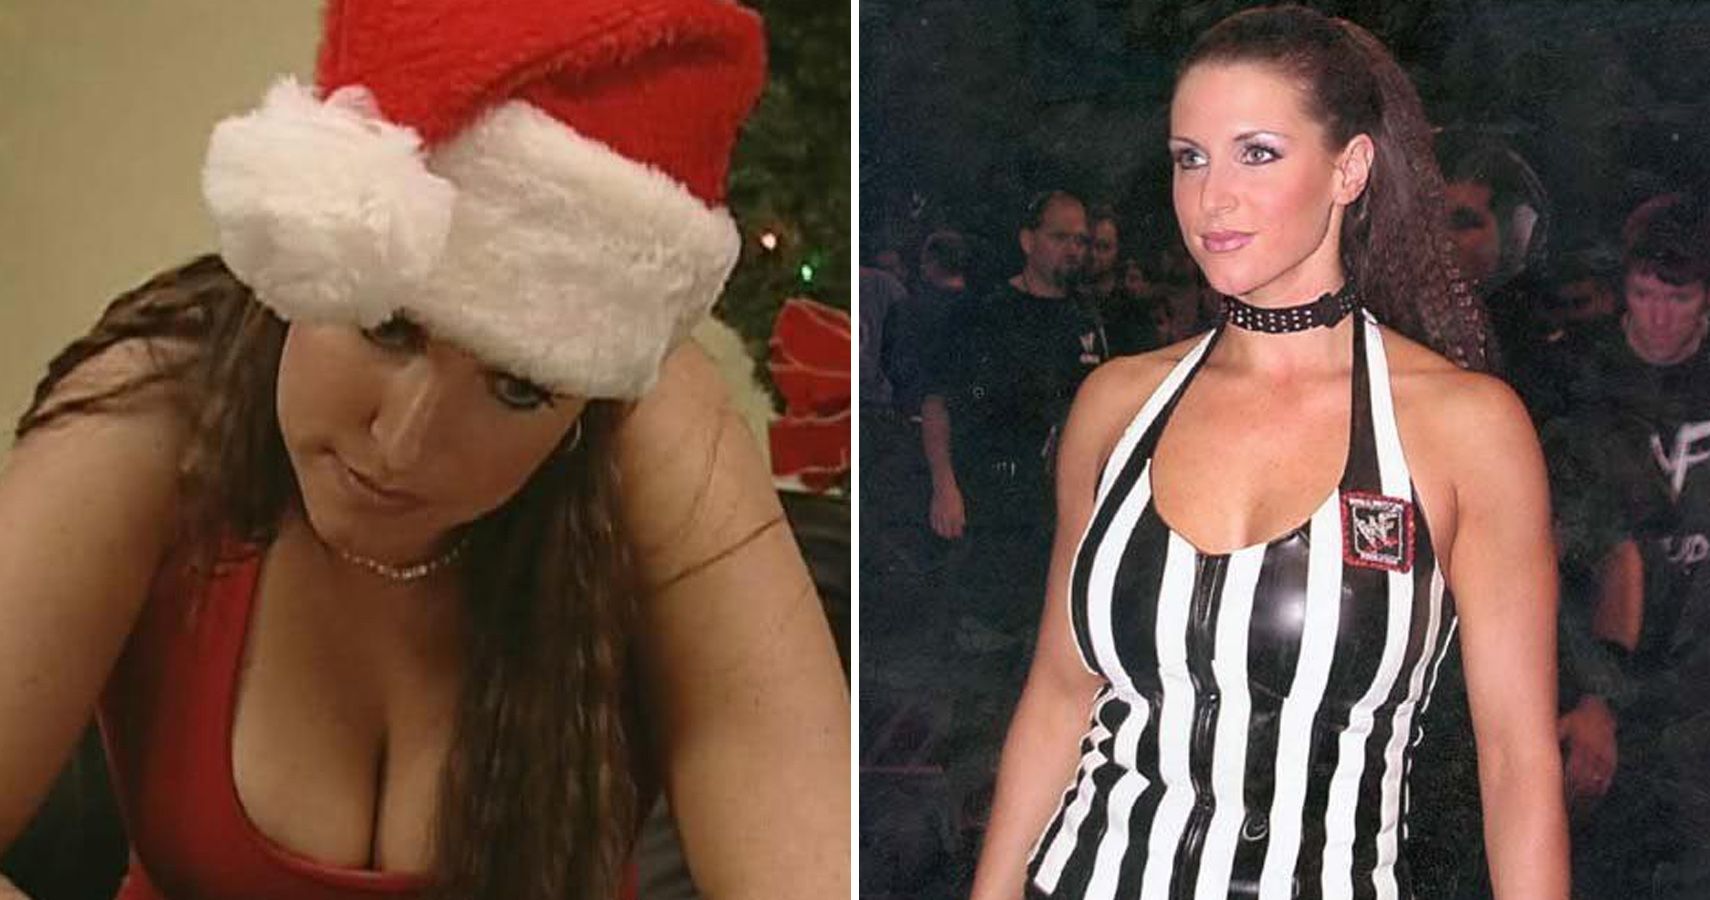 Top 20 Must-See Pictures Of A Young Stephanie McMahon.